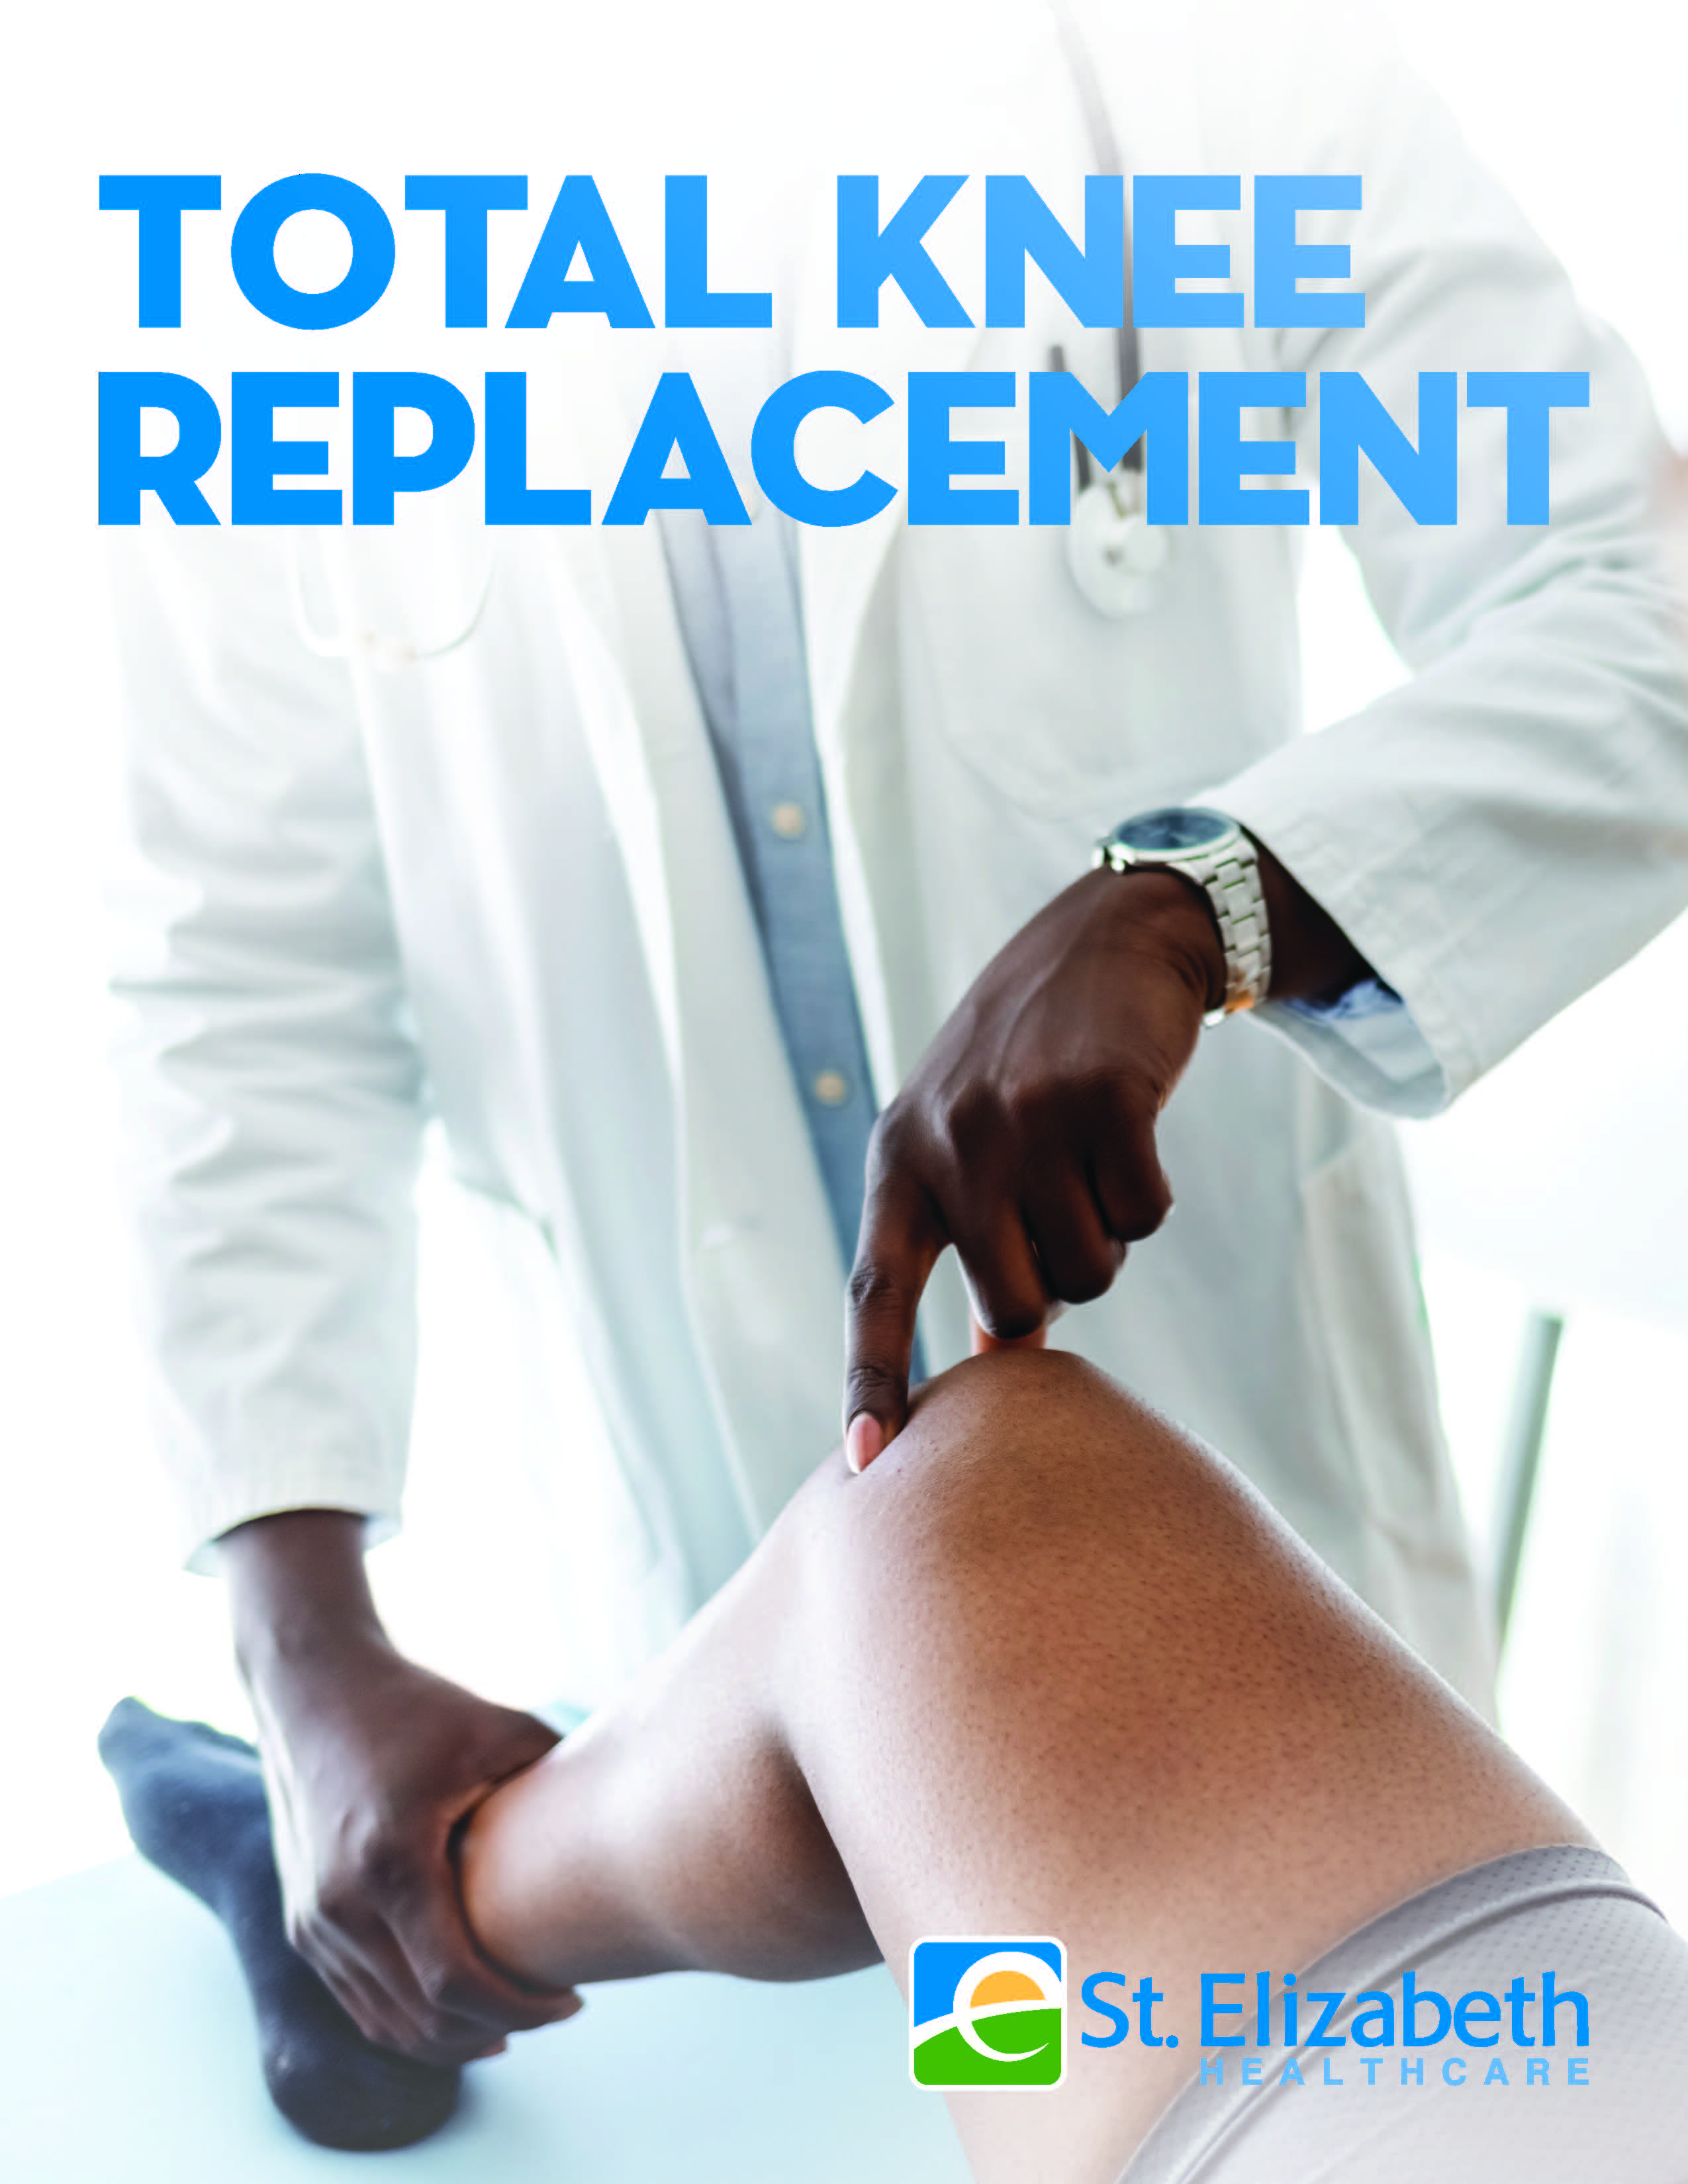 St. Elizabeth Total Knee Replacement Guide Cover1